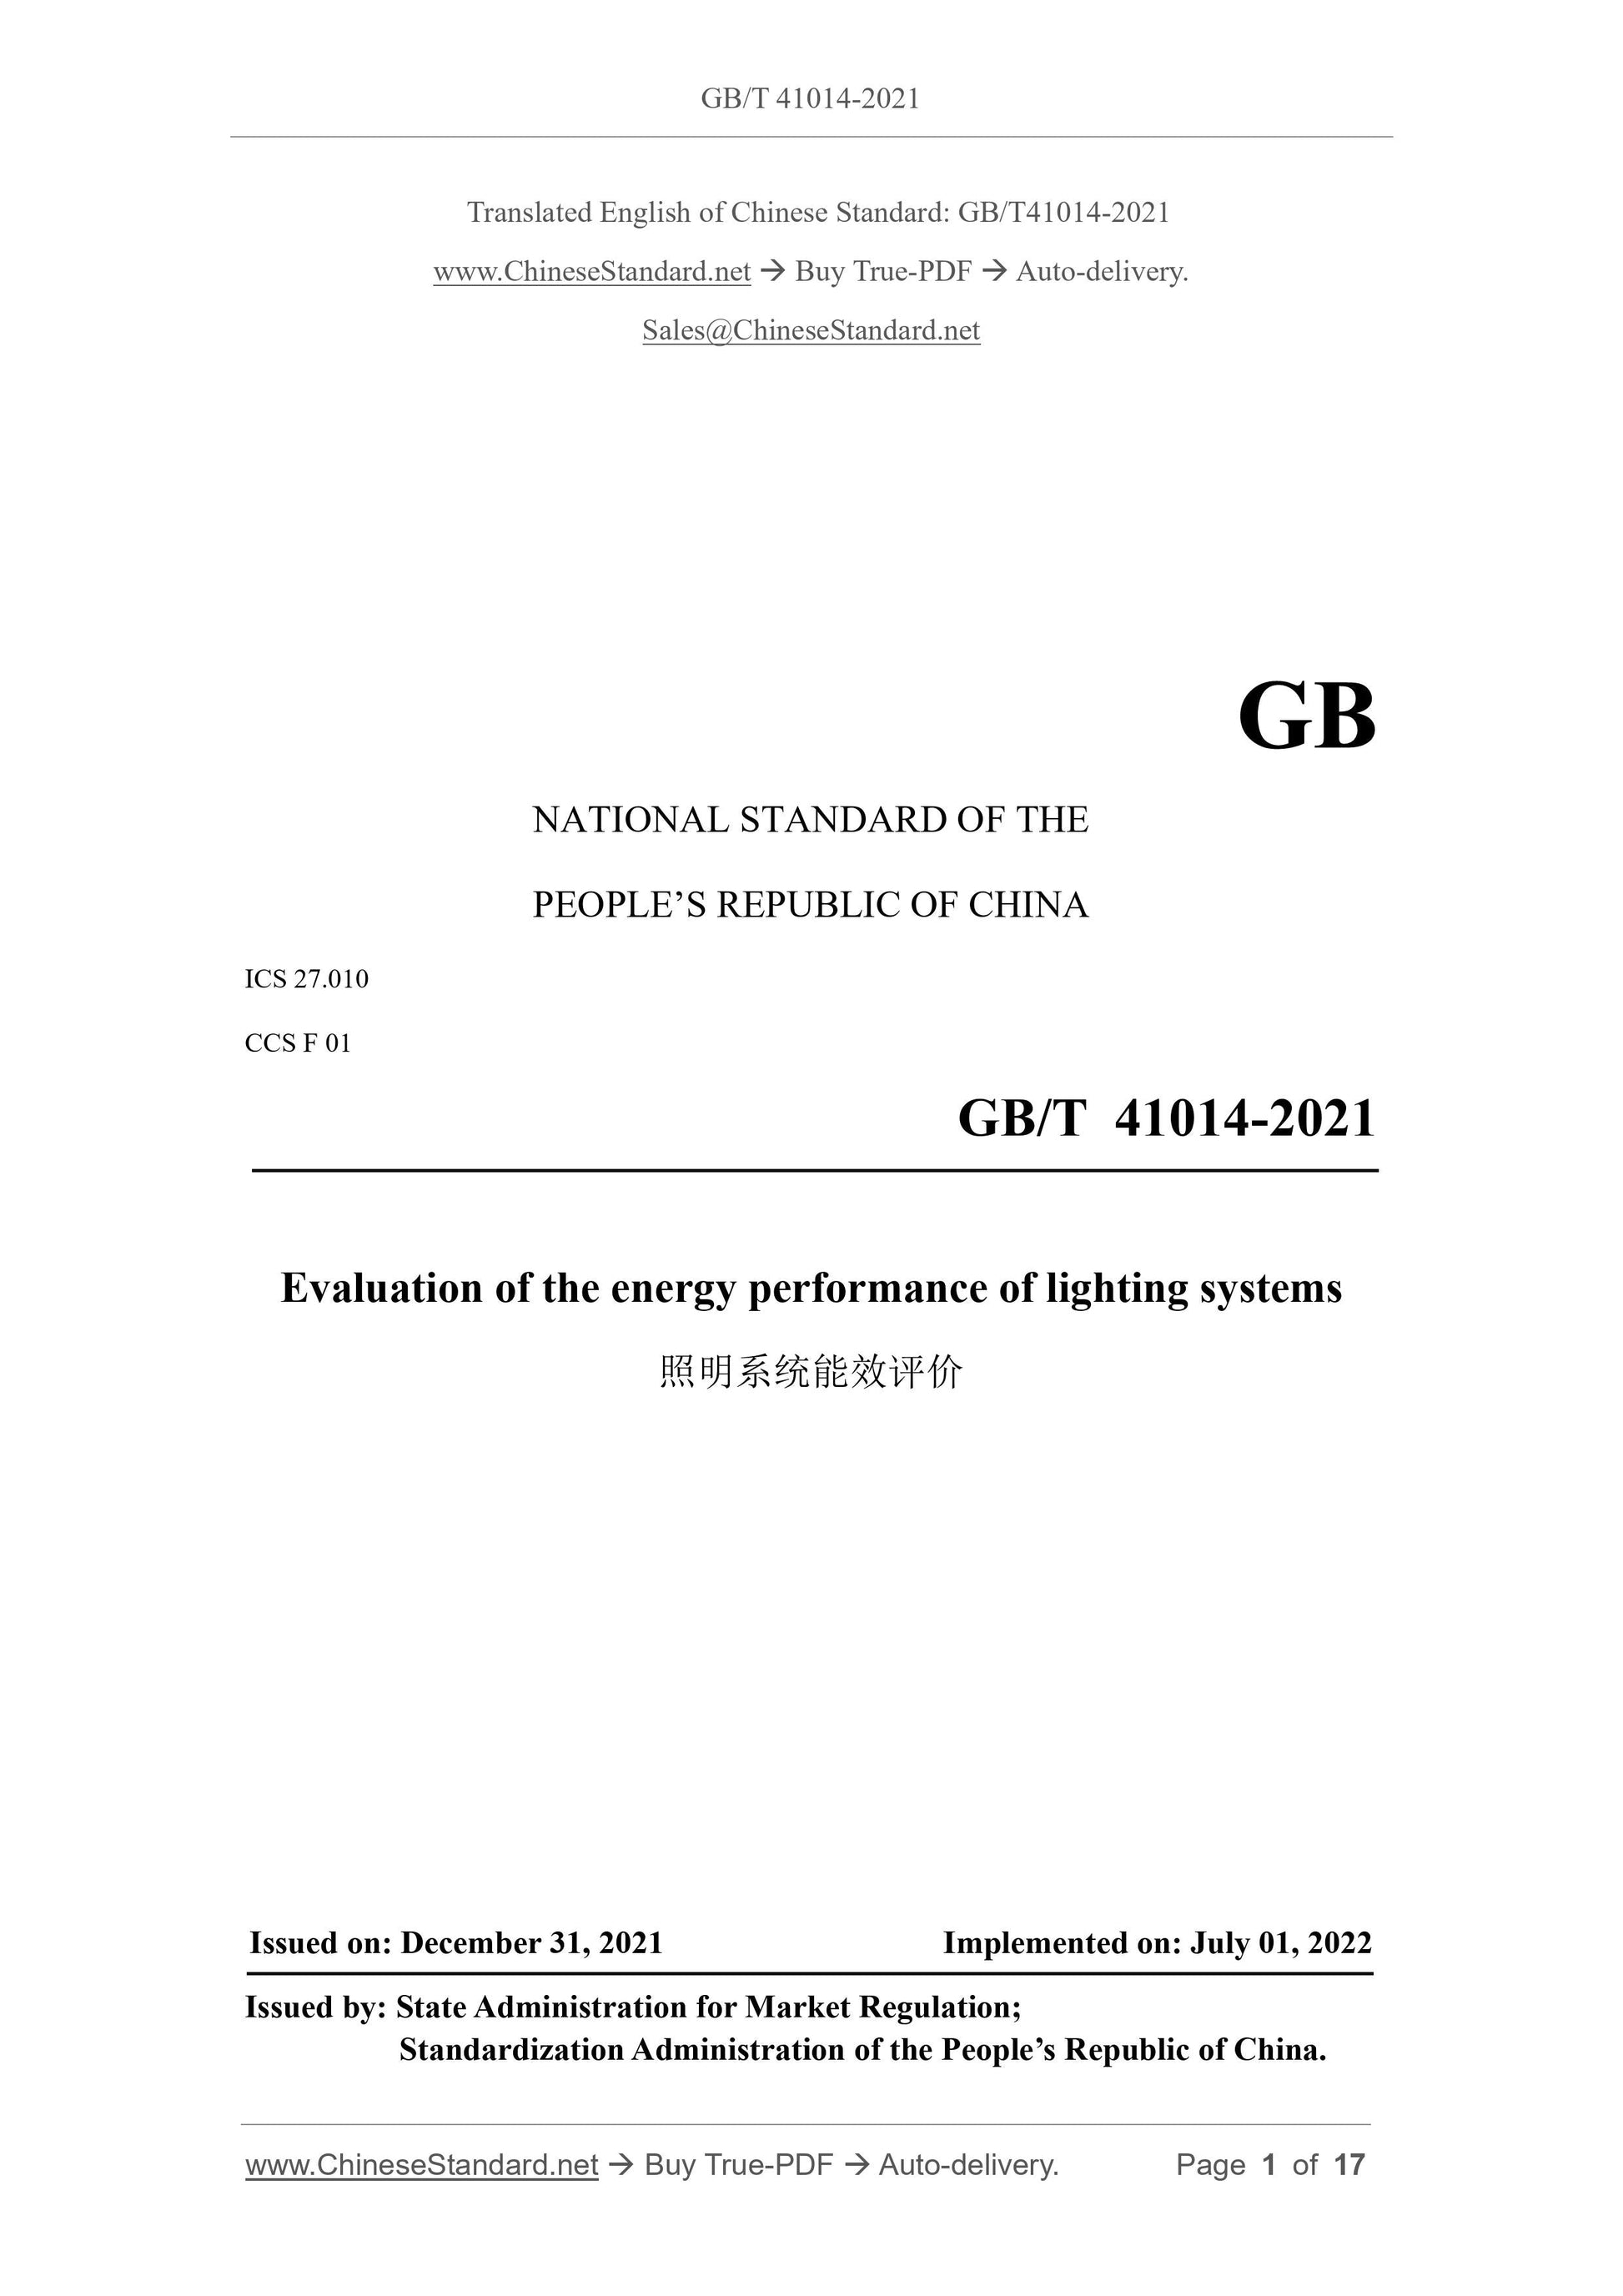 GB/T 41014-2021 Page 1